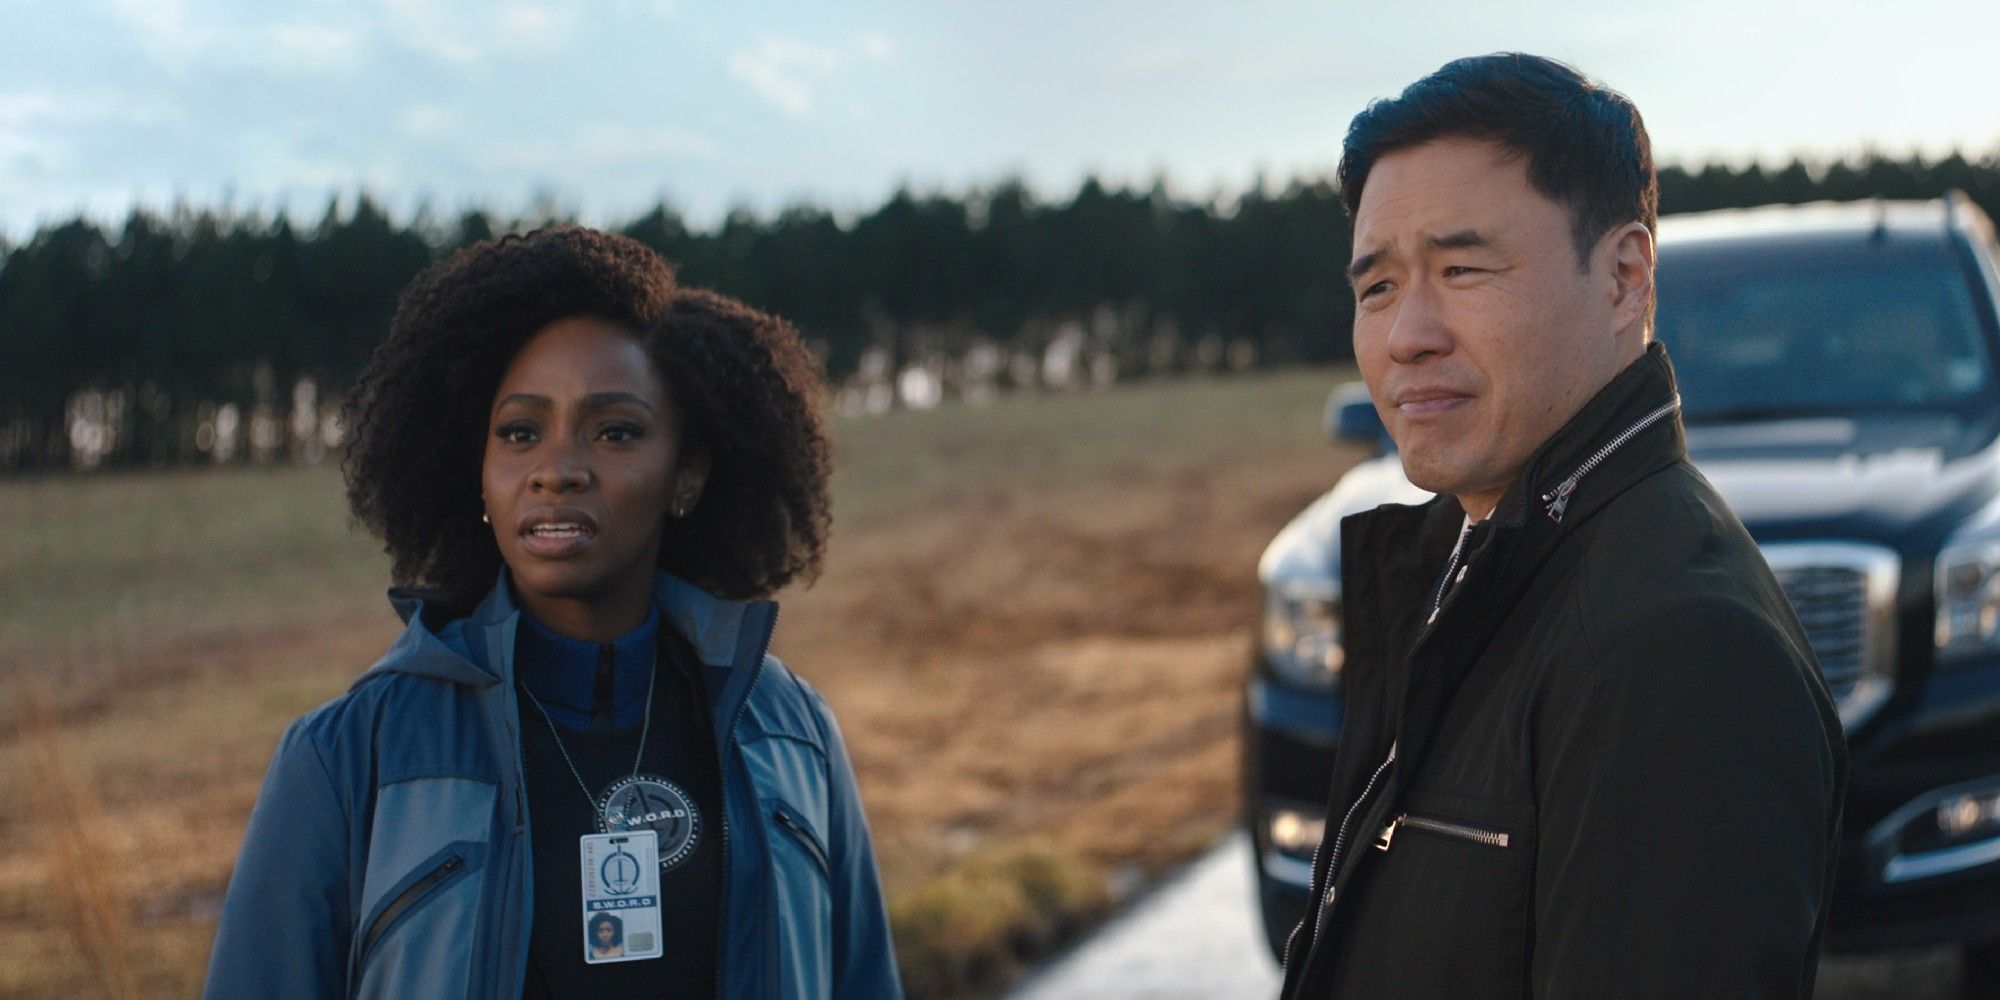 Teyonah Parris and Randall Park investigate outside of Westview in WandaVision